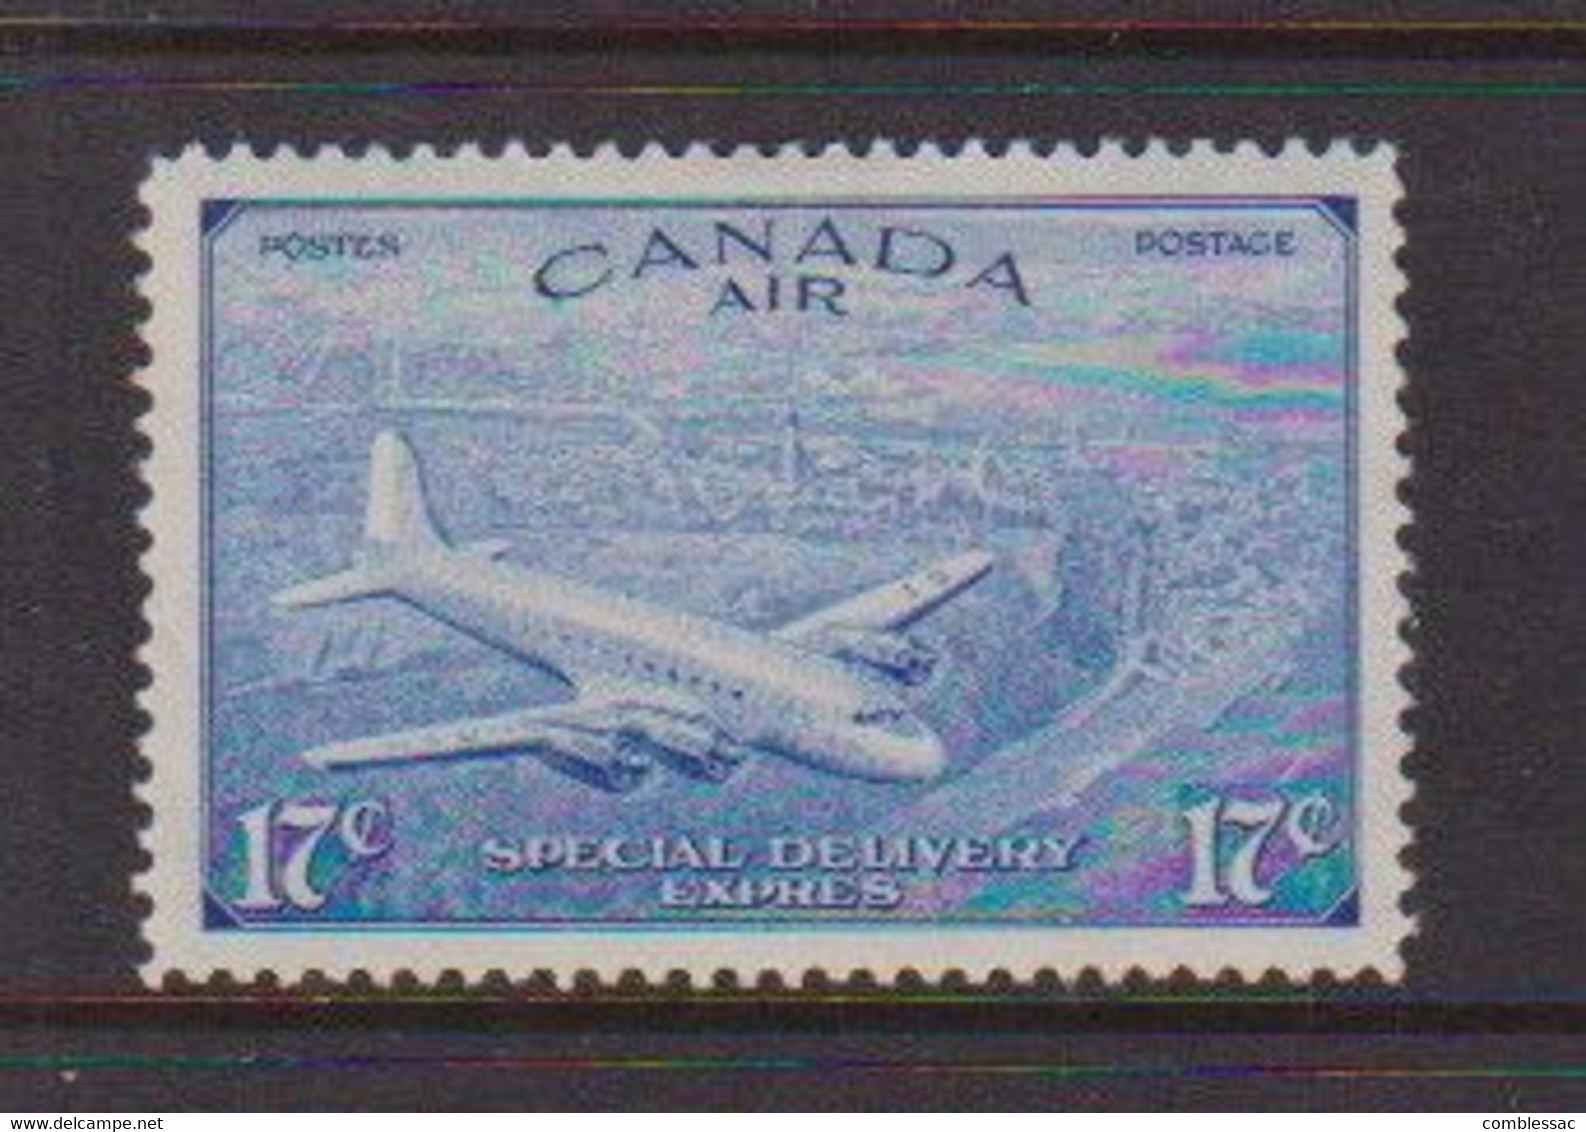 CANADA    Special  Delivery    Air  Stamp   17c  Blue    MH - Poste Aérienne: Exprès